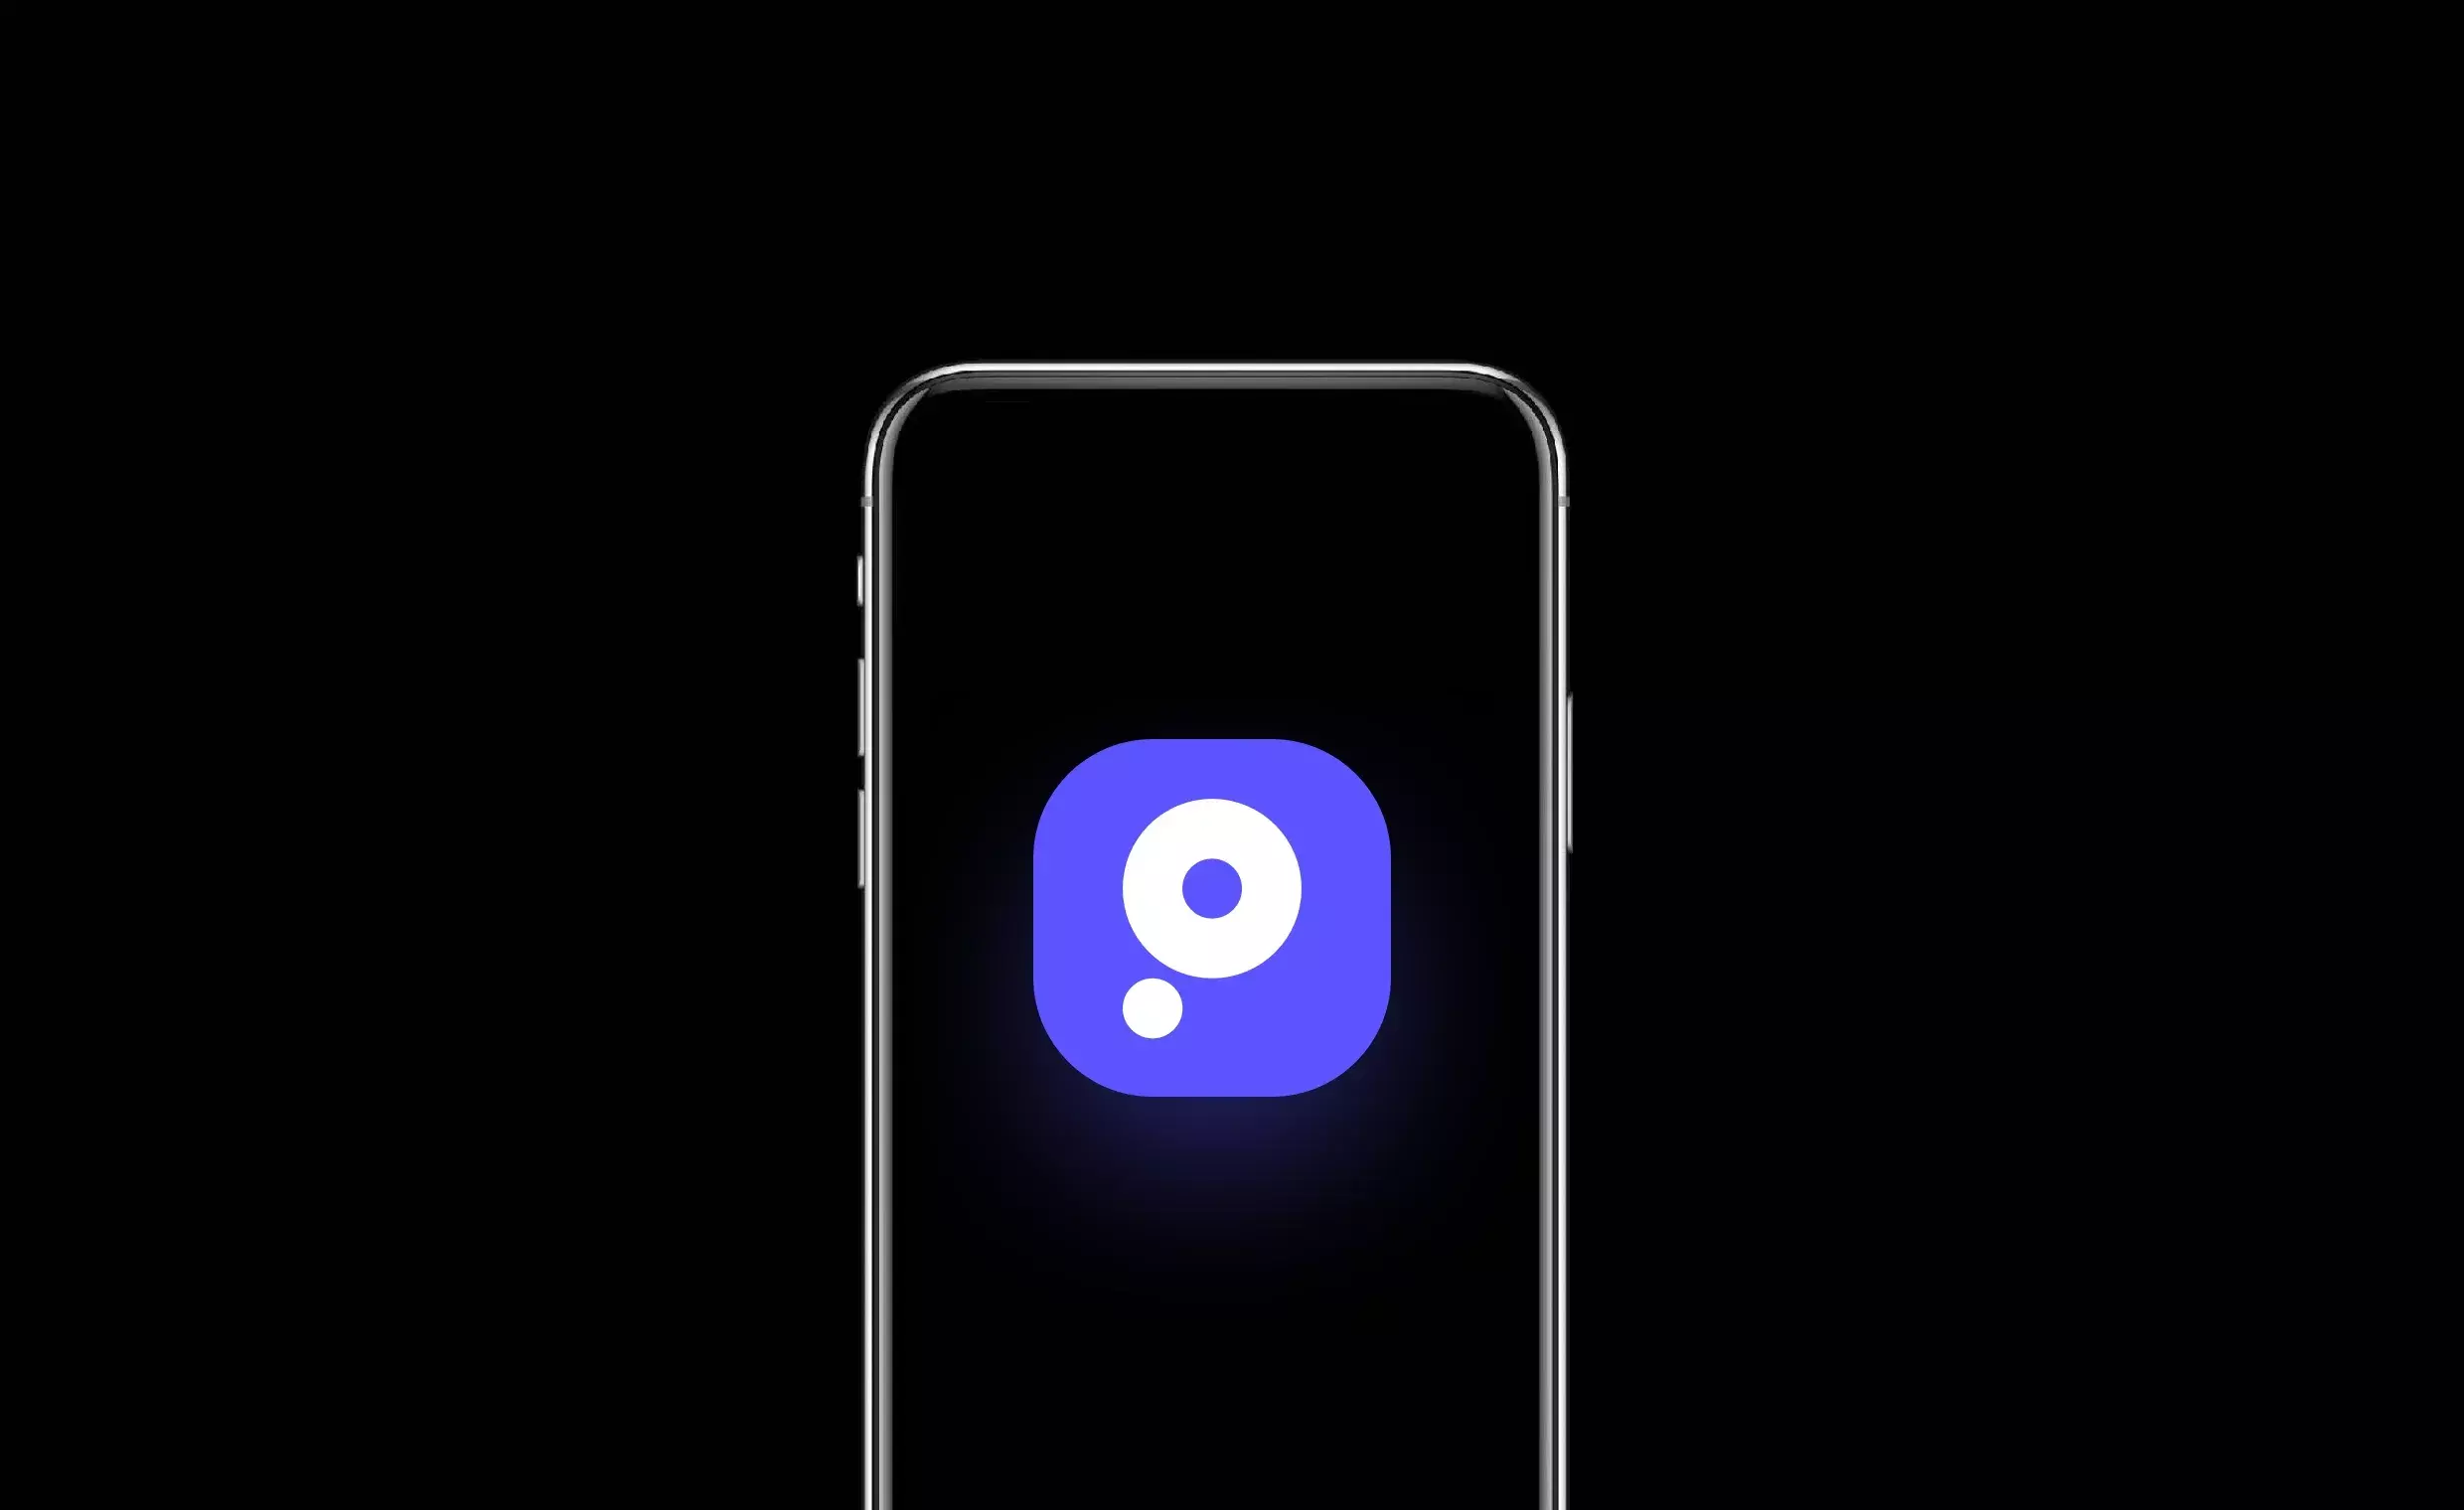 ProsperOps icon on the phone screen